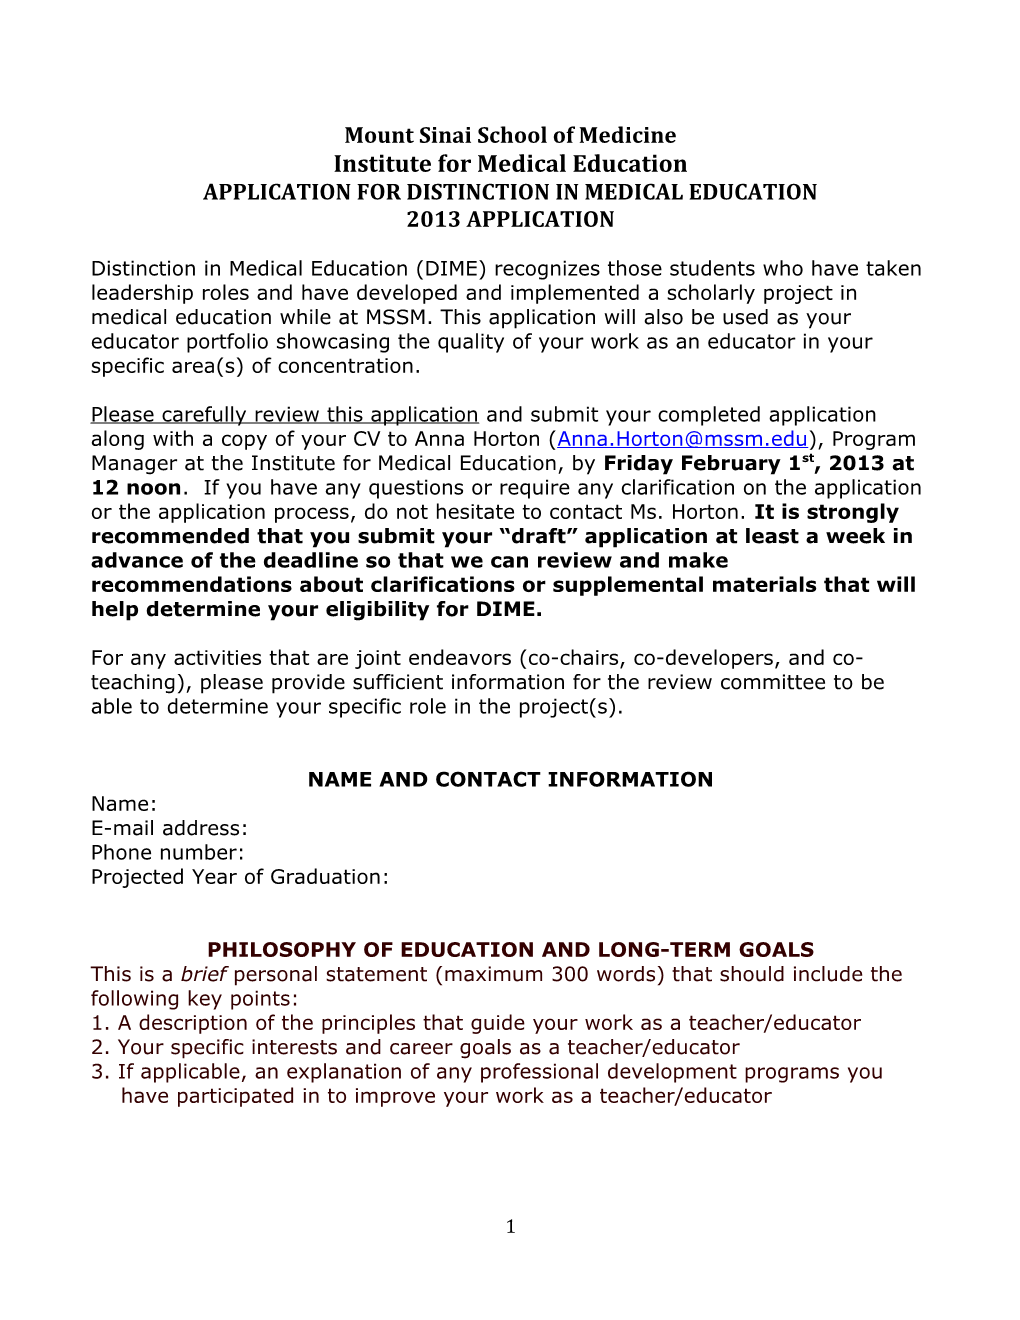 Application for Distinction in Medical Education (Dime)